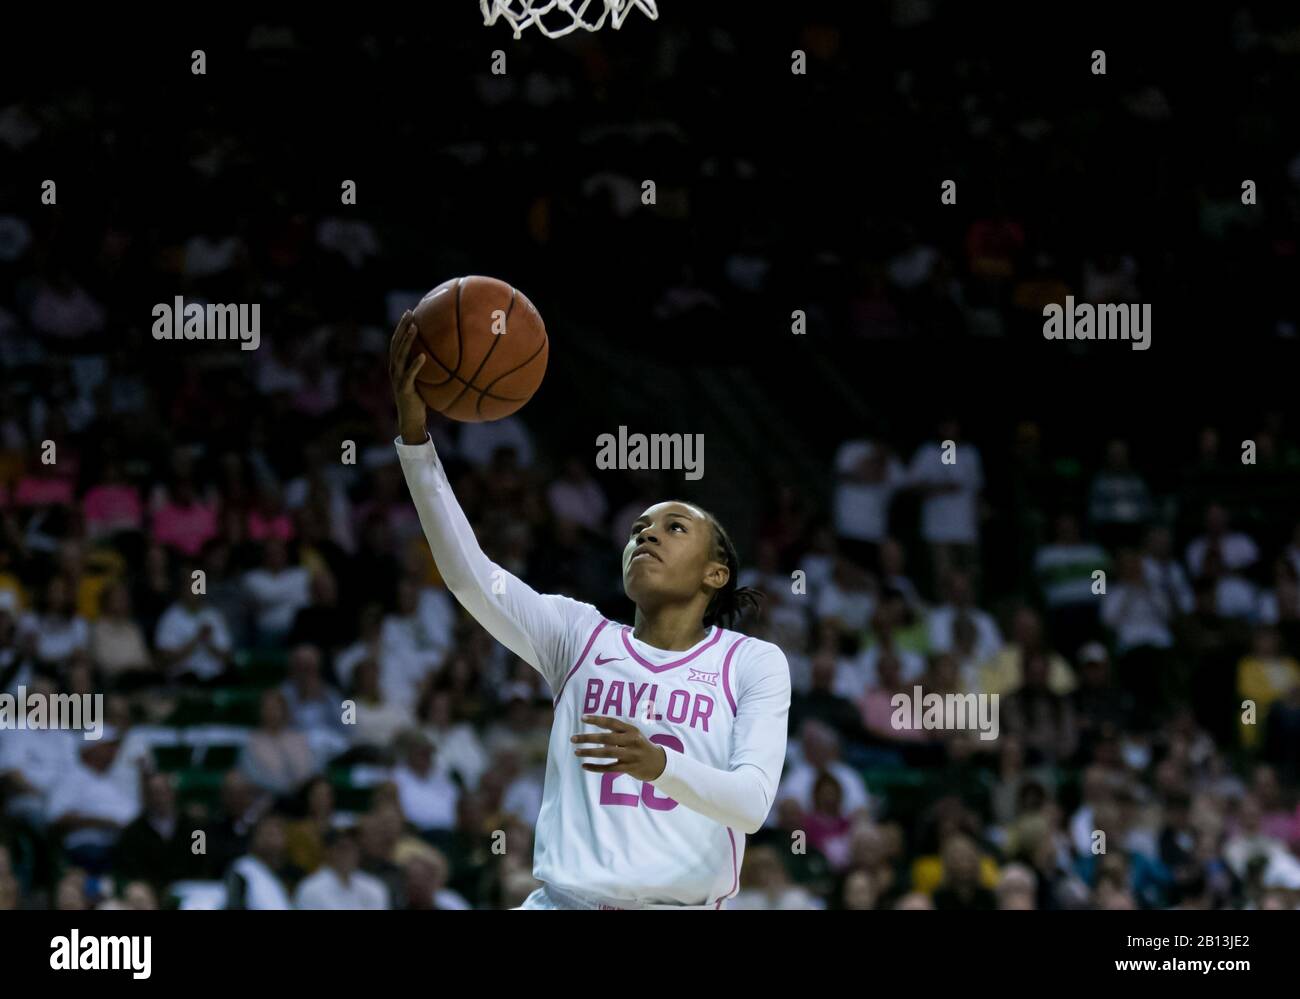 Waco, Texas, USA. 22nd Feb, 2020. Baylor Lady Bears guard Juicy Landrum (20) shoots a layup during the 1st half of the NCAA Women's Basketball game between Oklahoma Sooners and the Baylor Lady Bears at The Ferrell Center in Waco, Texas. Matthew Lynch/CSM/Alamy Live News Stock Photo